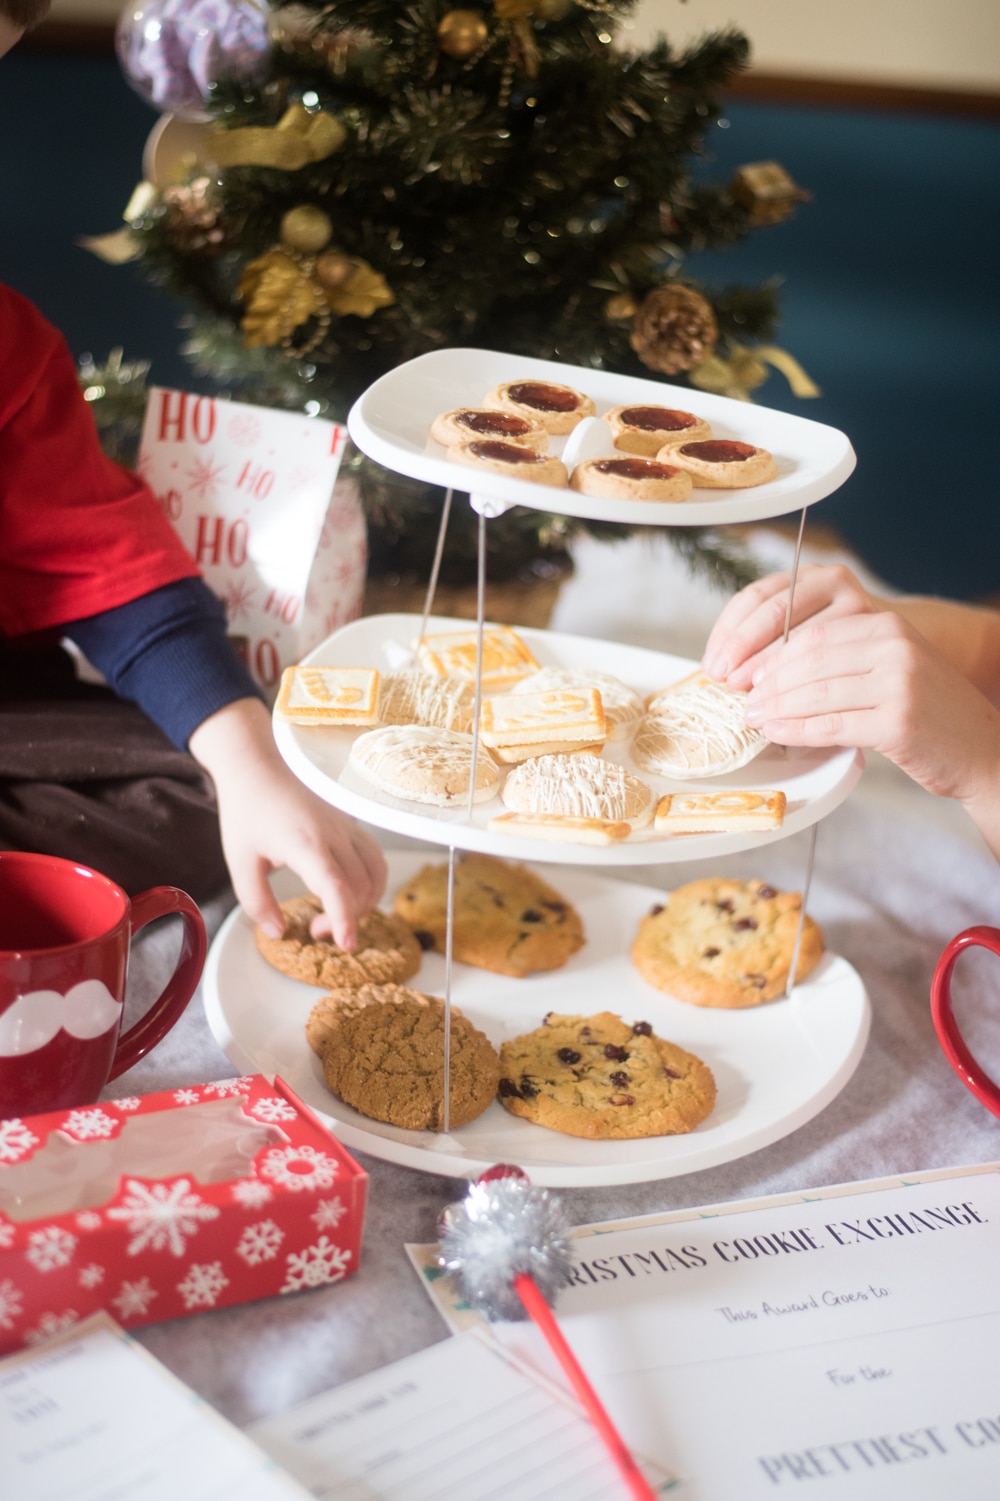 A woman sitting at a table with a plate of food, with Christmas cookie